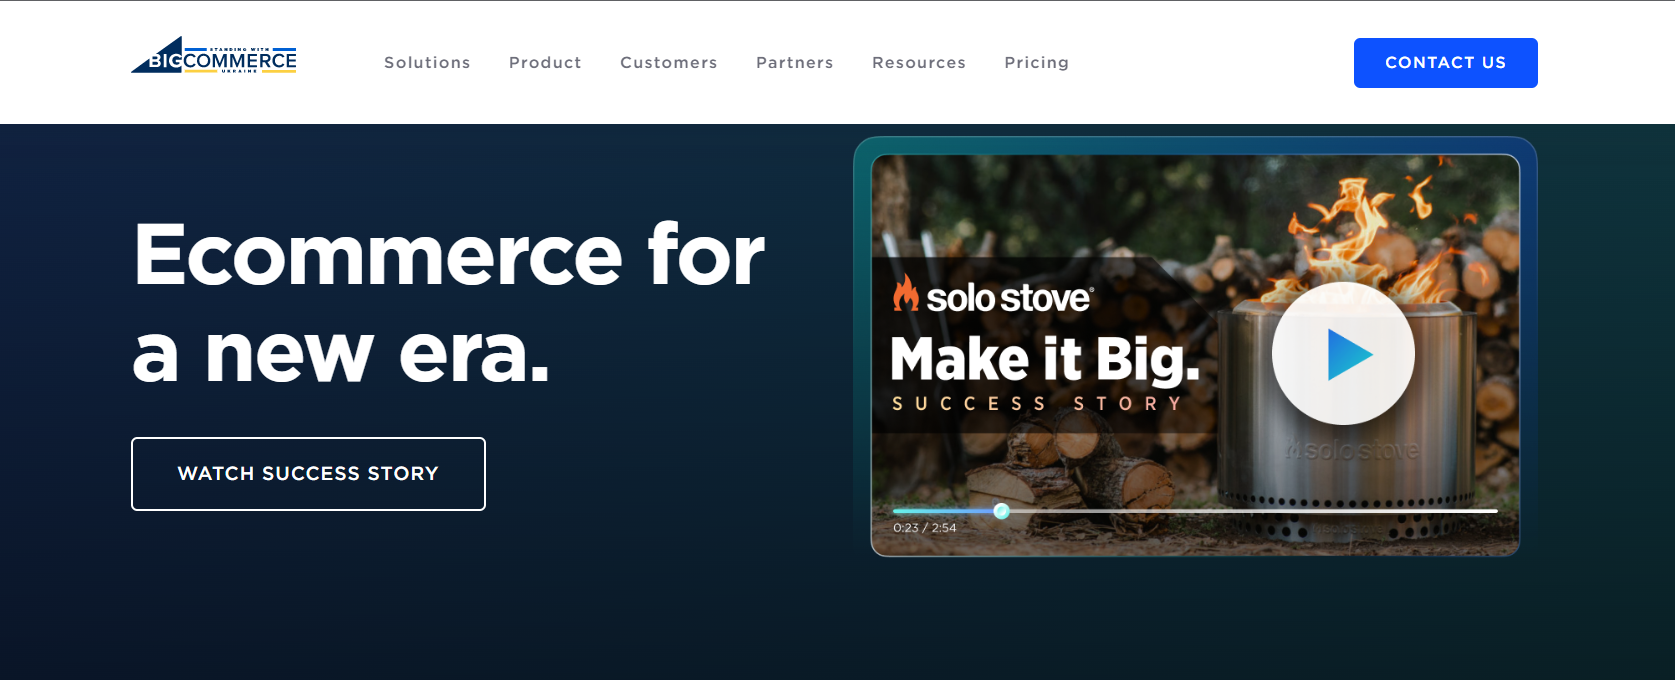 BigCommerce is the best option for you. Its in-built tools and features help you start and grow your online store